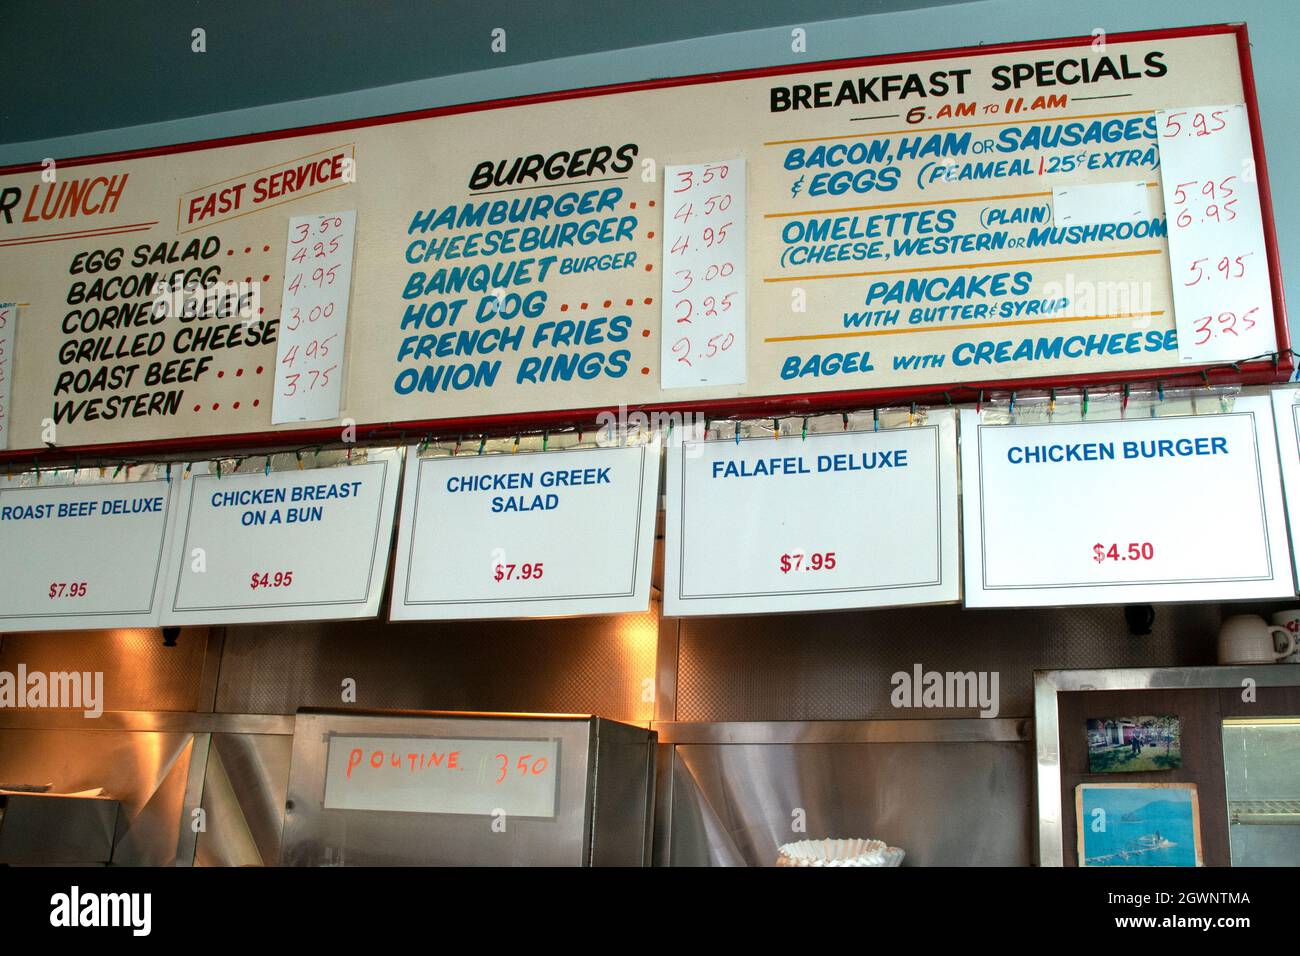 The interior amd menu sign above the kitchen at a retro greasy spoon diner and restaurant in Toronto, Ontario, Canada. Stock Photo